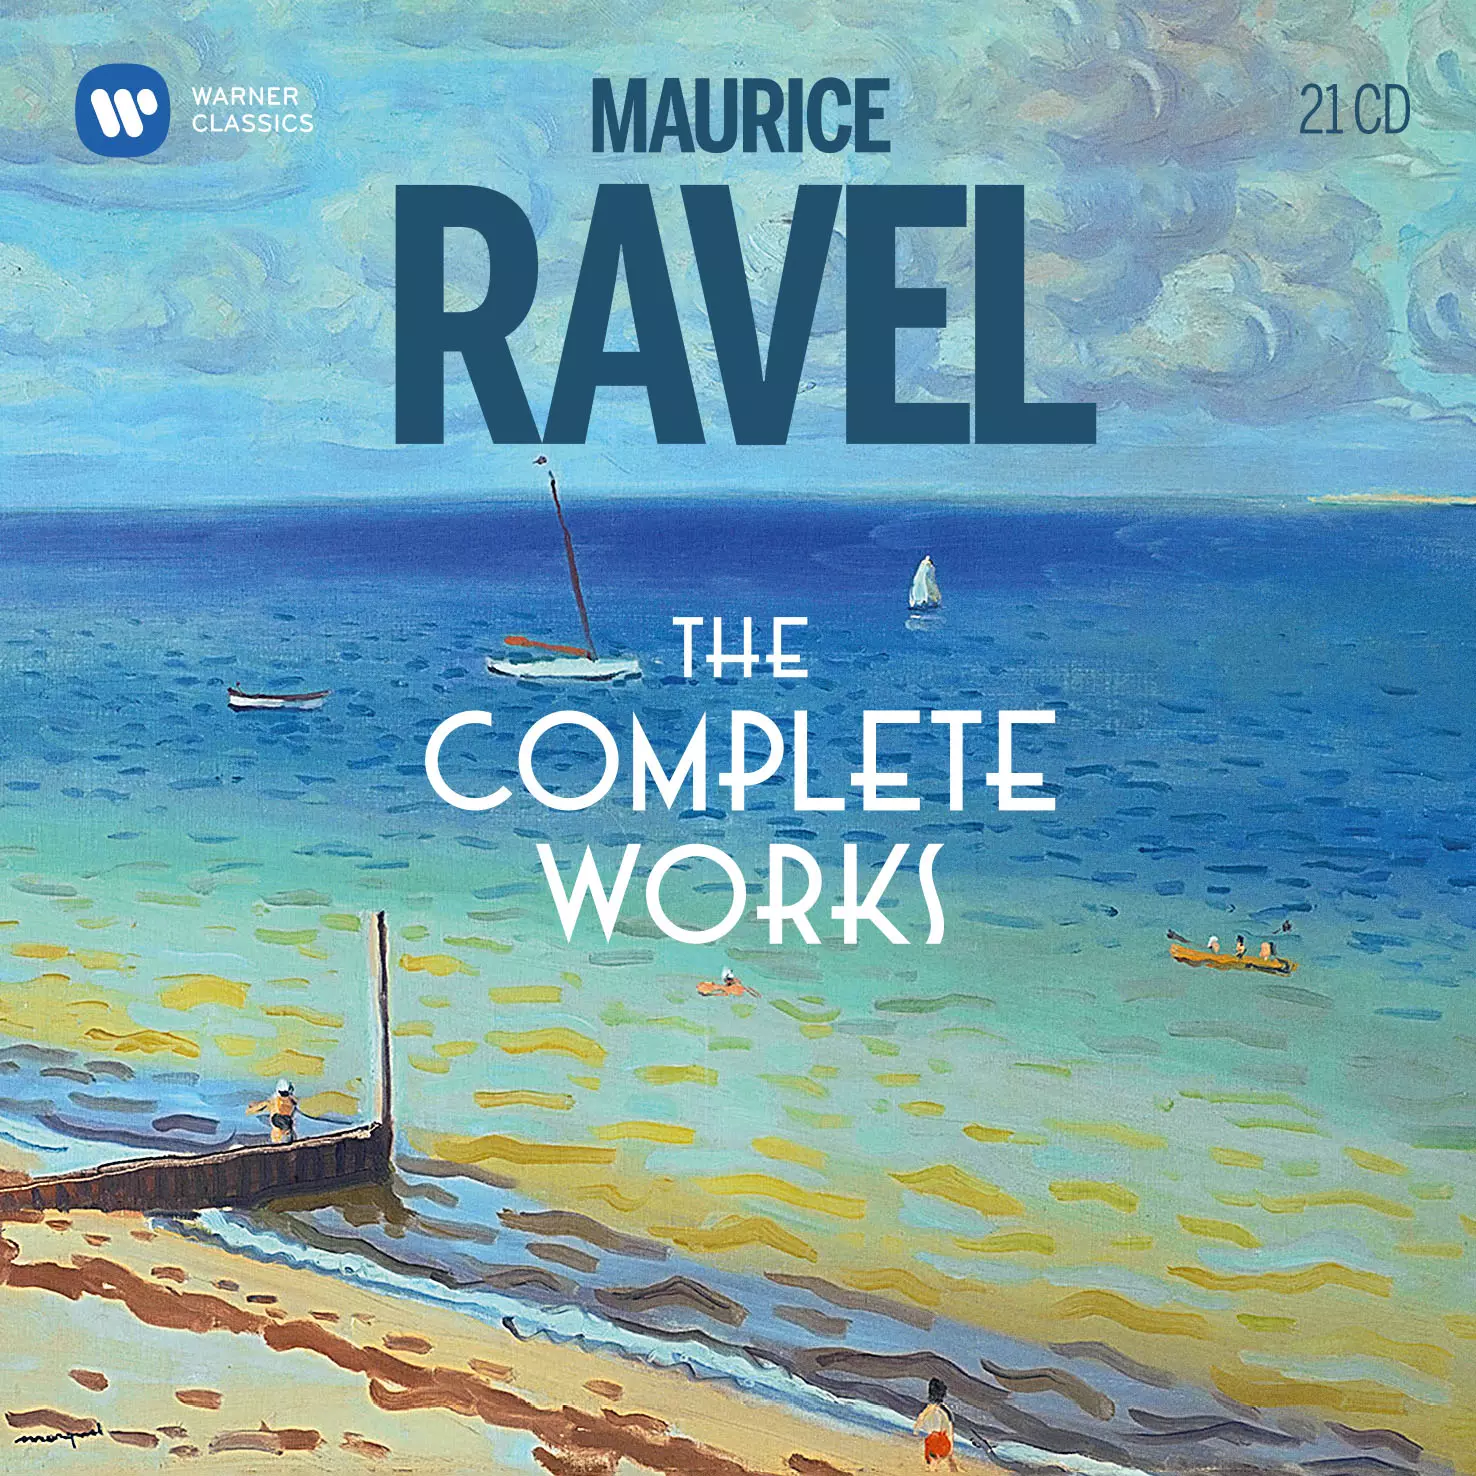 Maurice Ravel: The Complete Works | Warner Classics